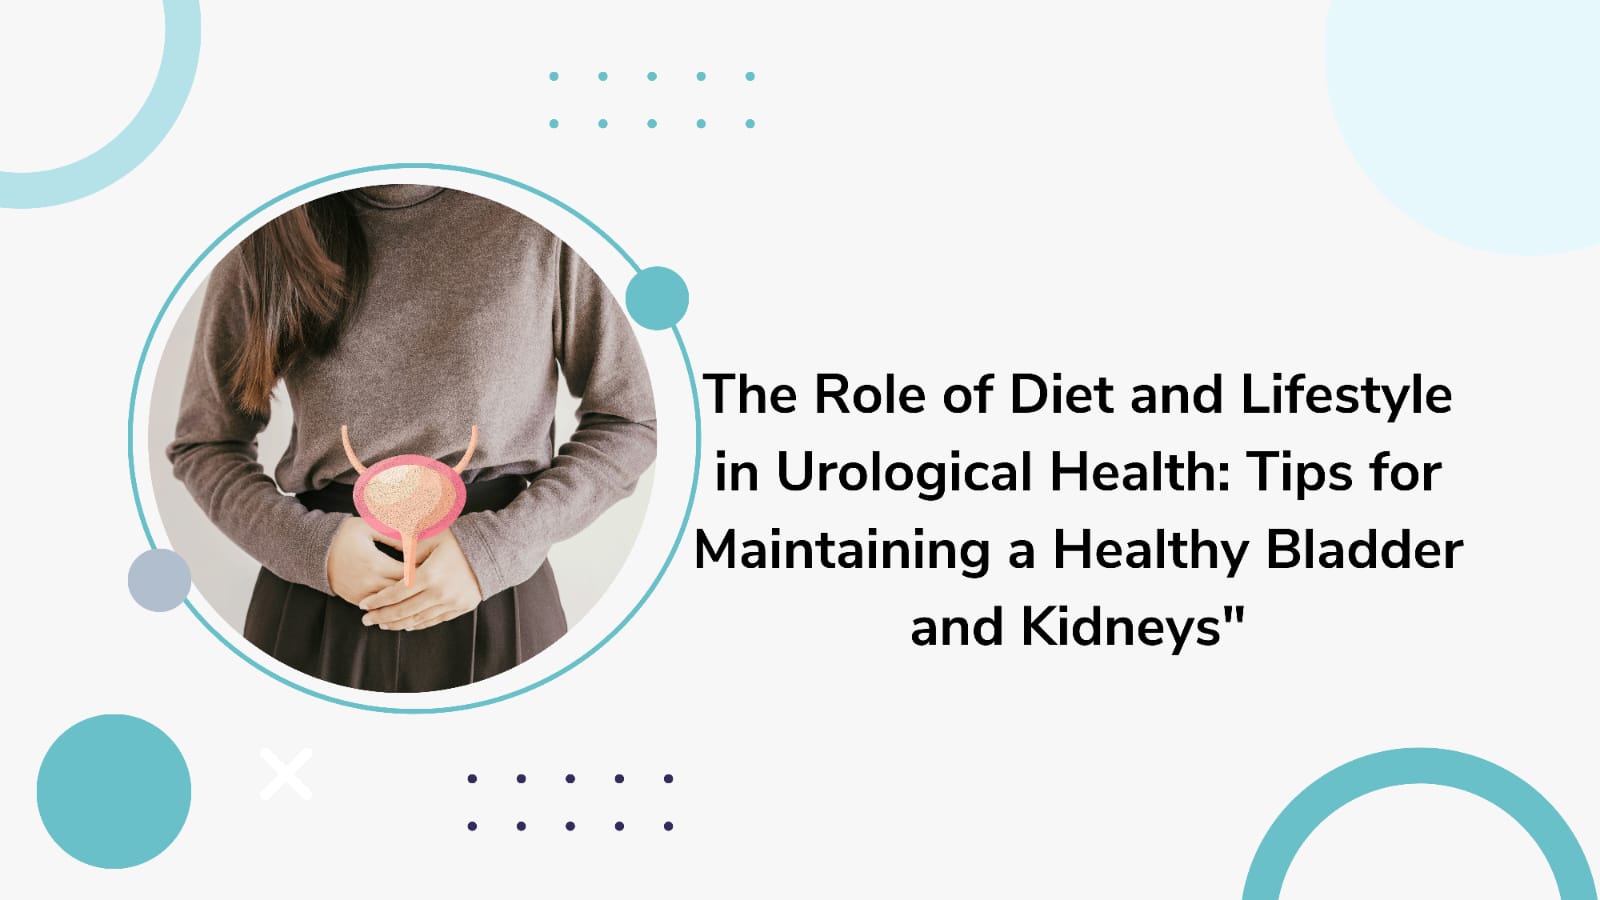 The Role of Diet and Lifestyle in Urological Health: Tips for Maintaining a Healthy Bladder and Kidneys